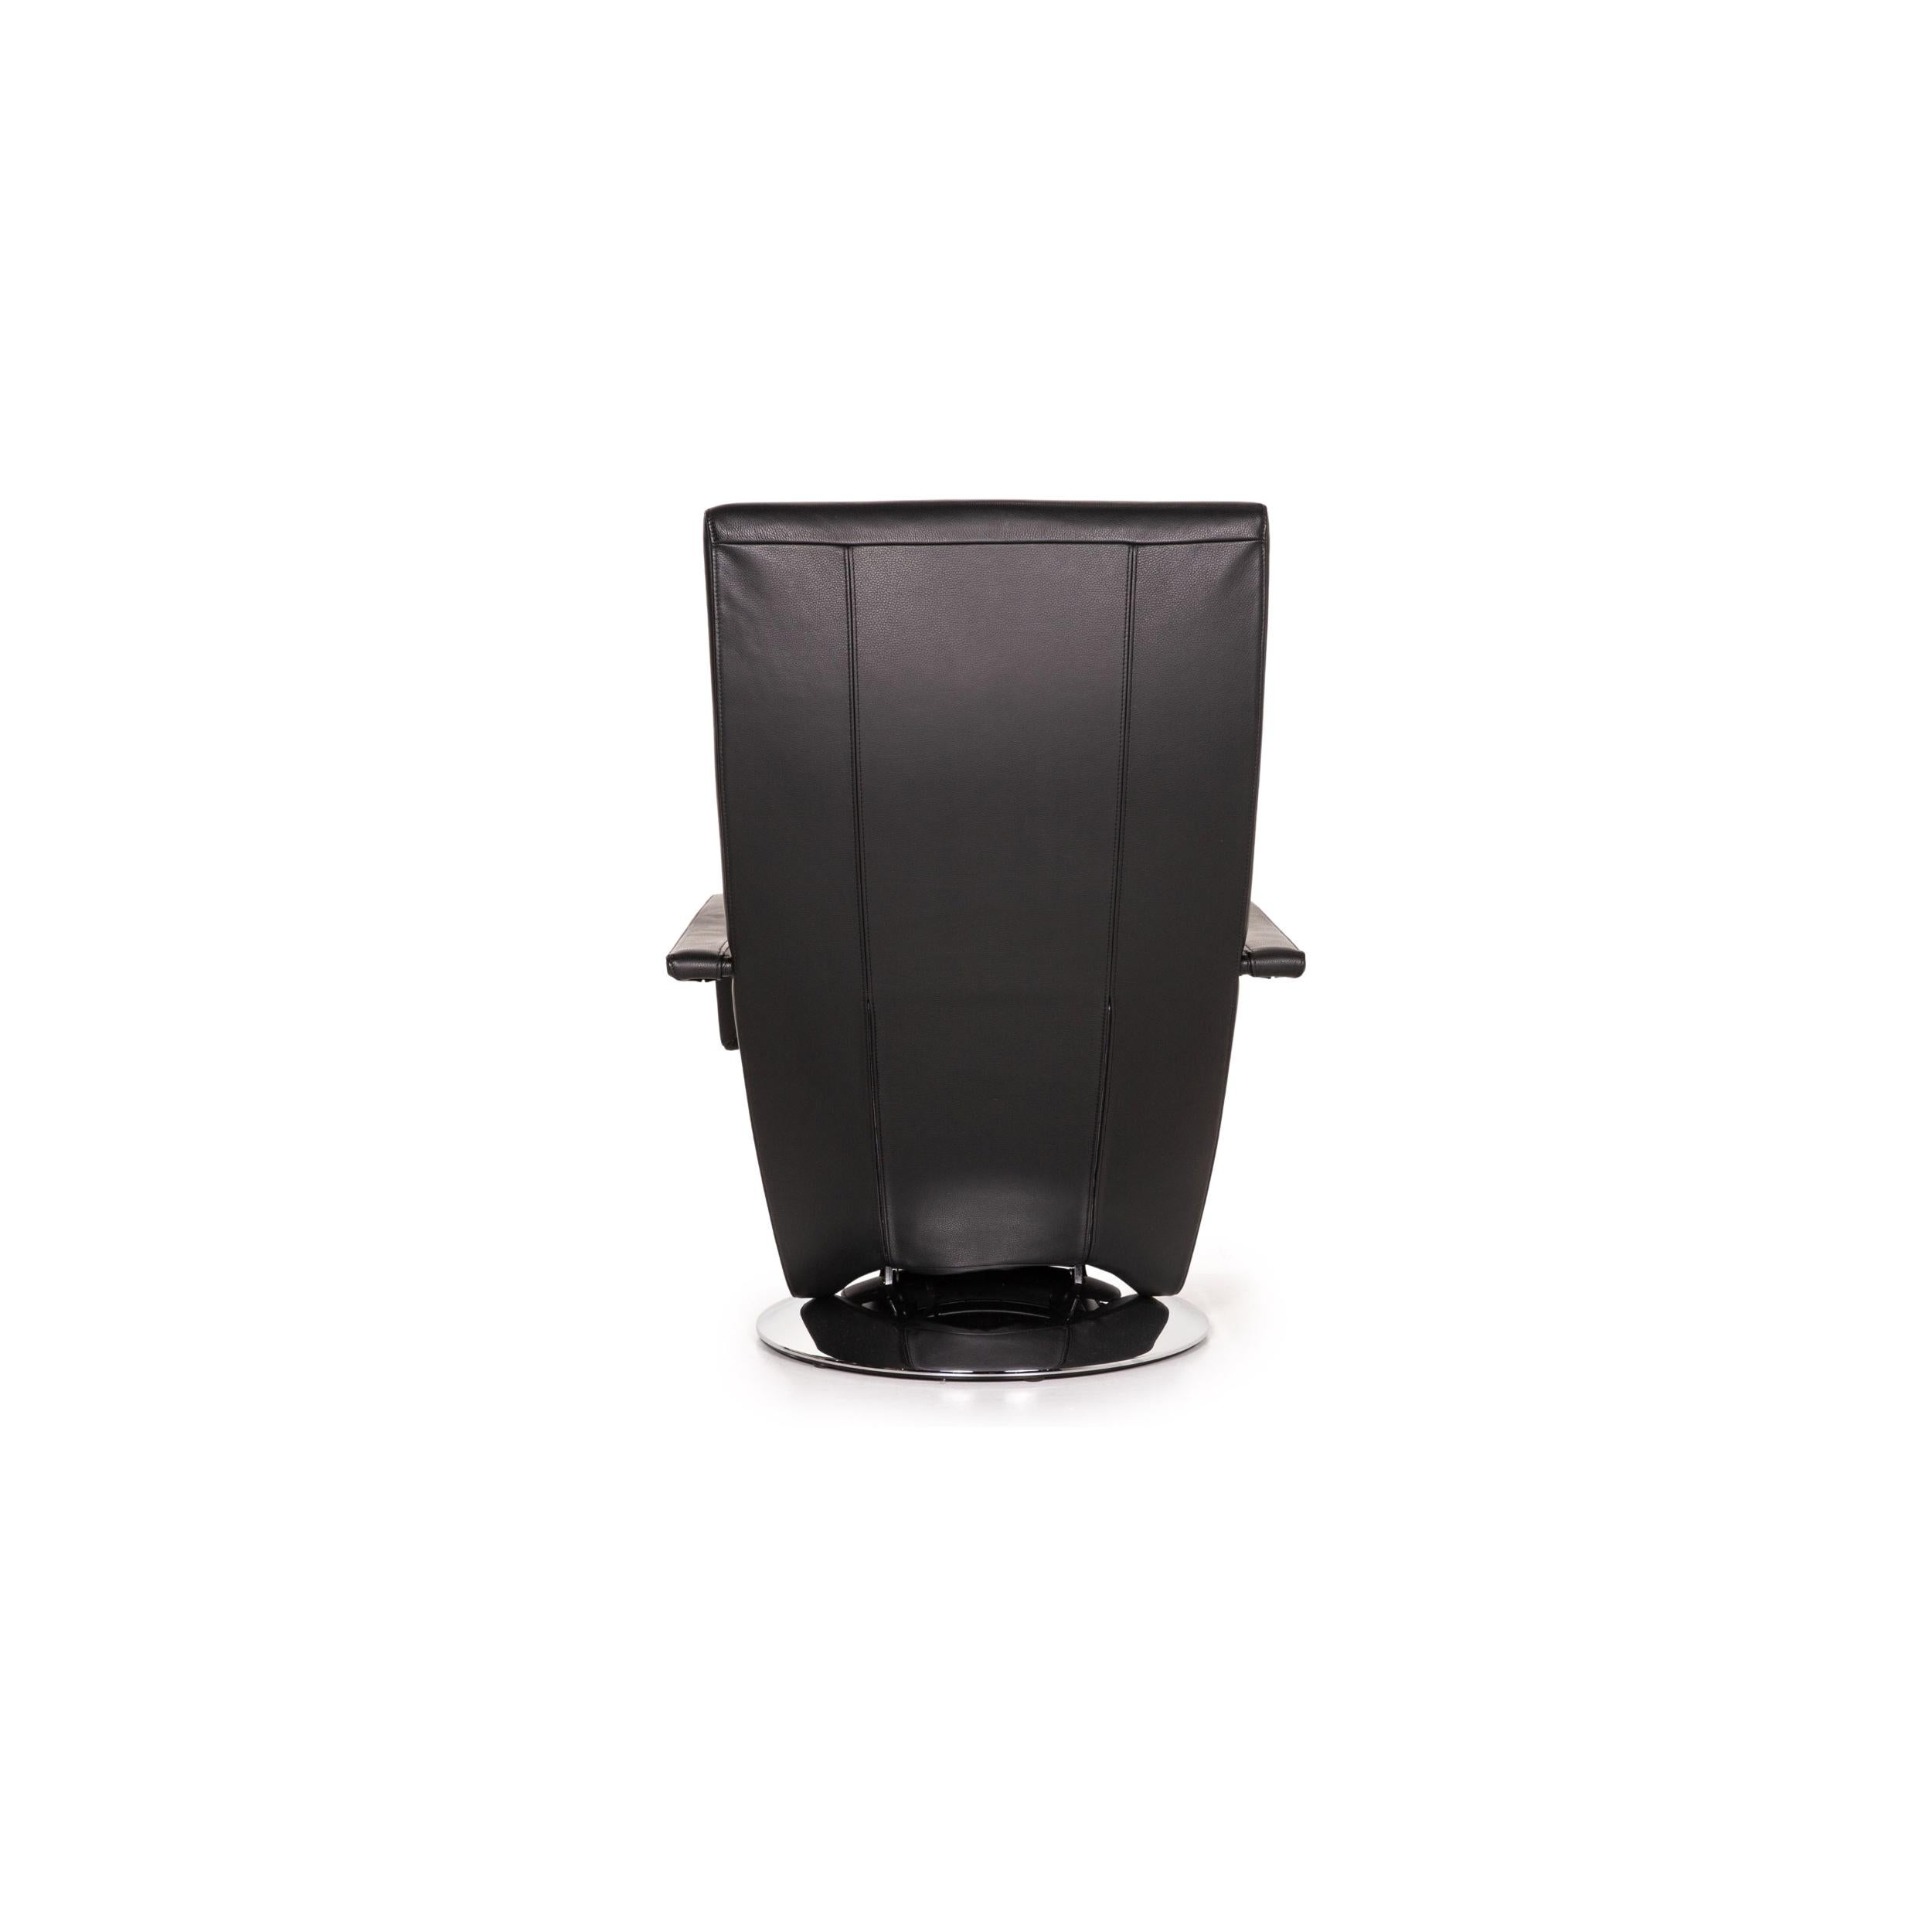 Fsm Evolo Leather Armchair Black Electrical Function Relax Function Recliner 4